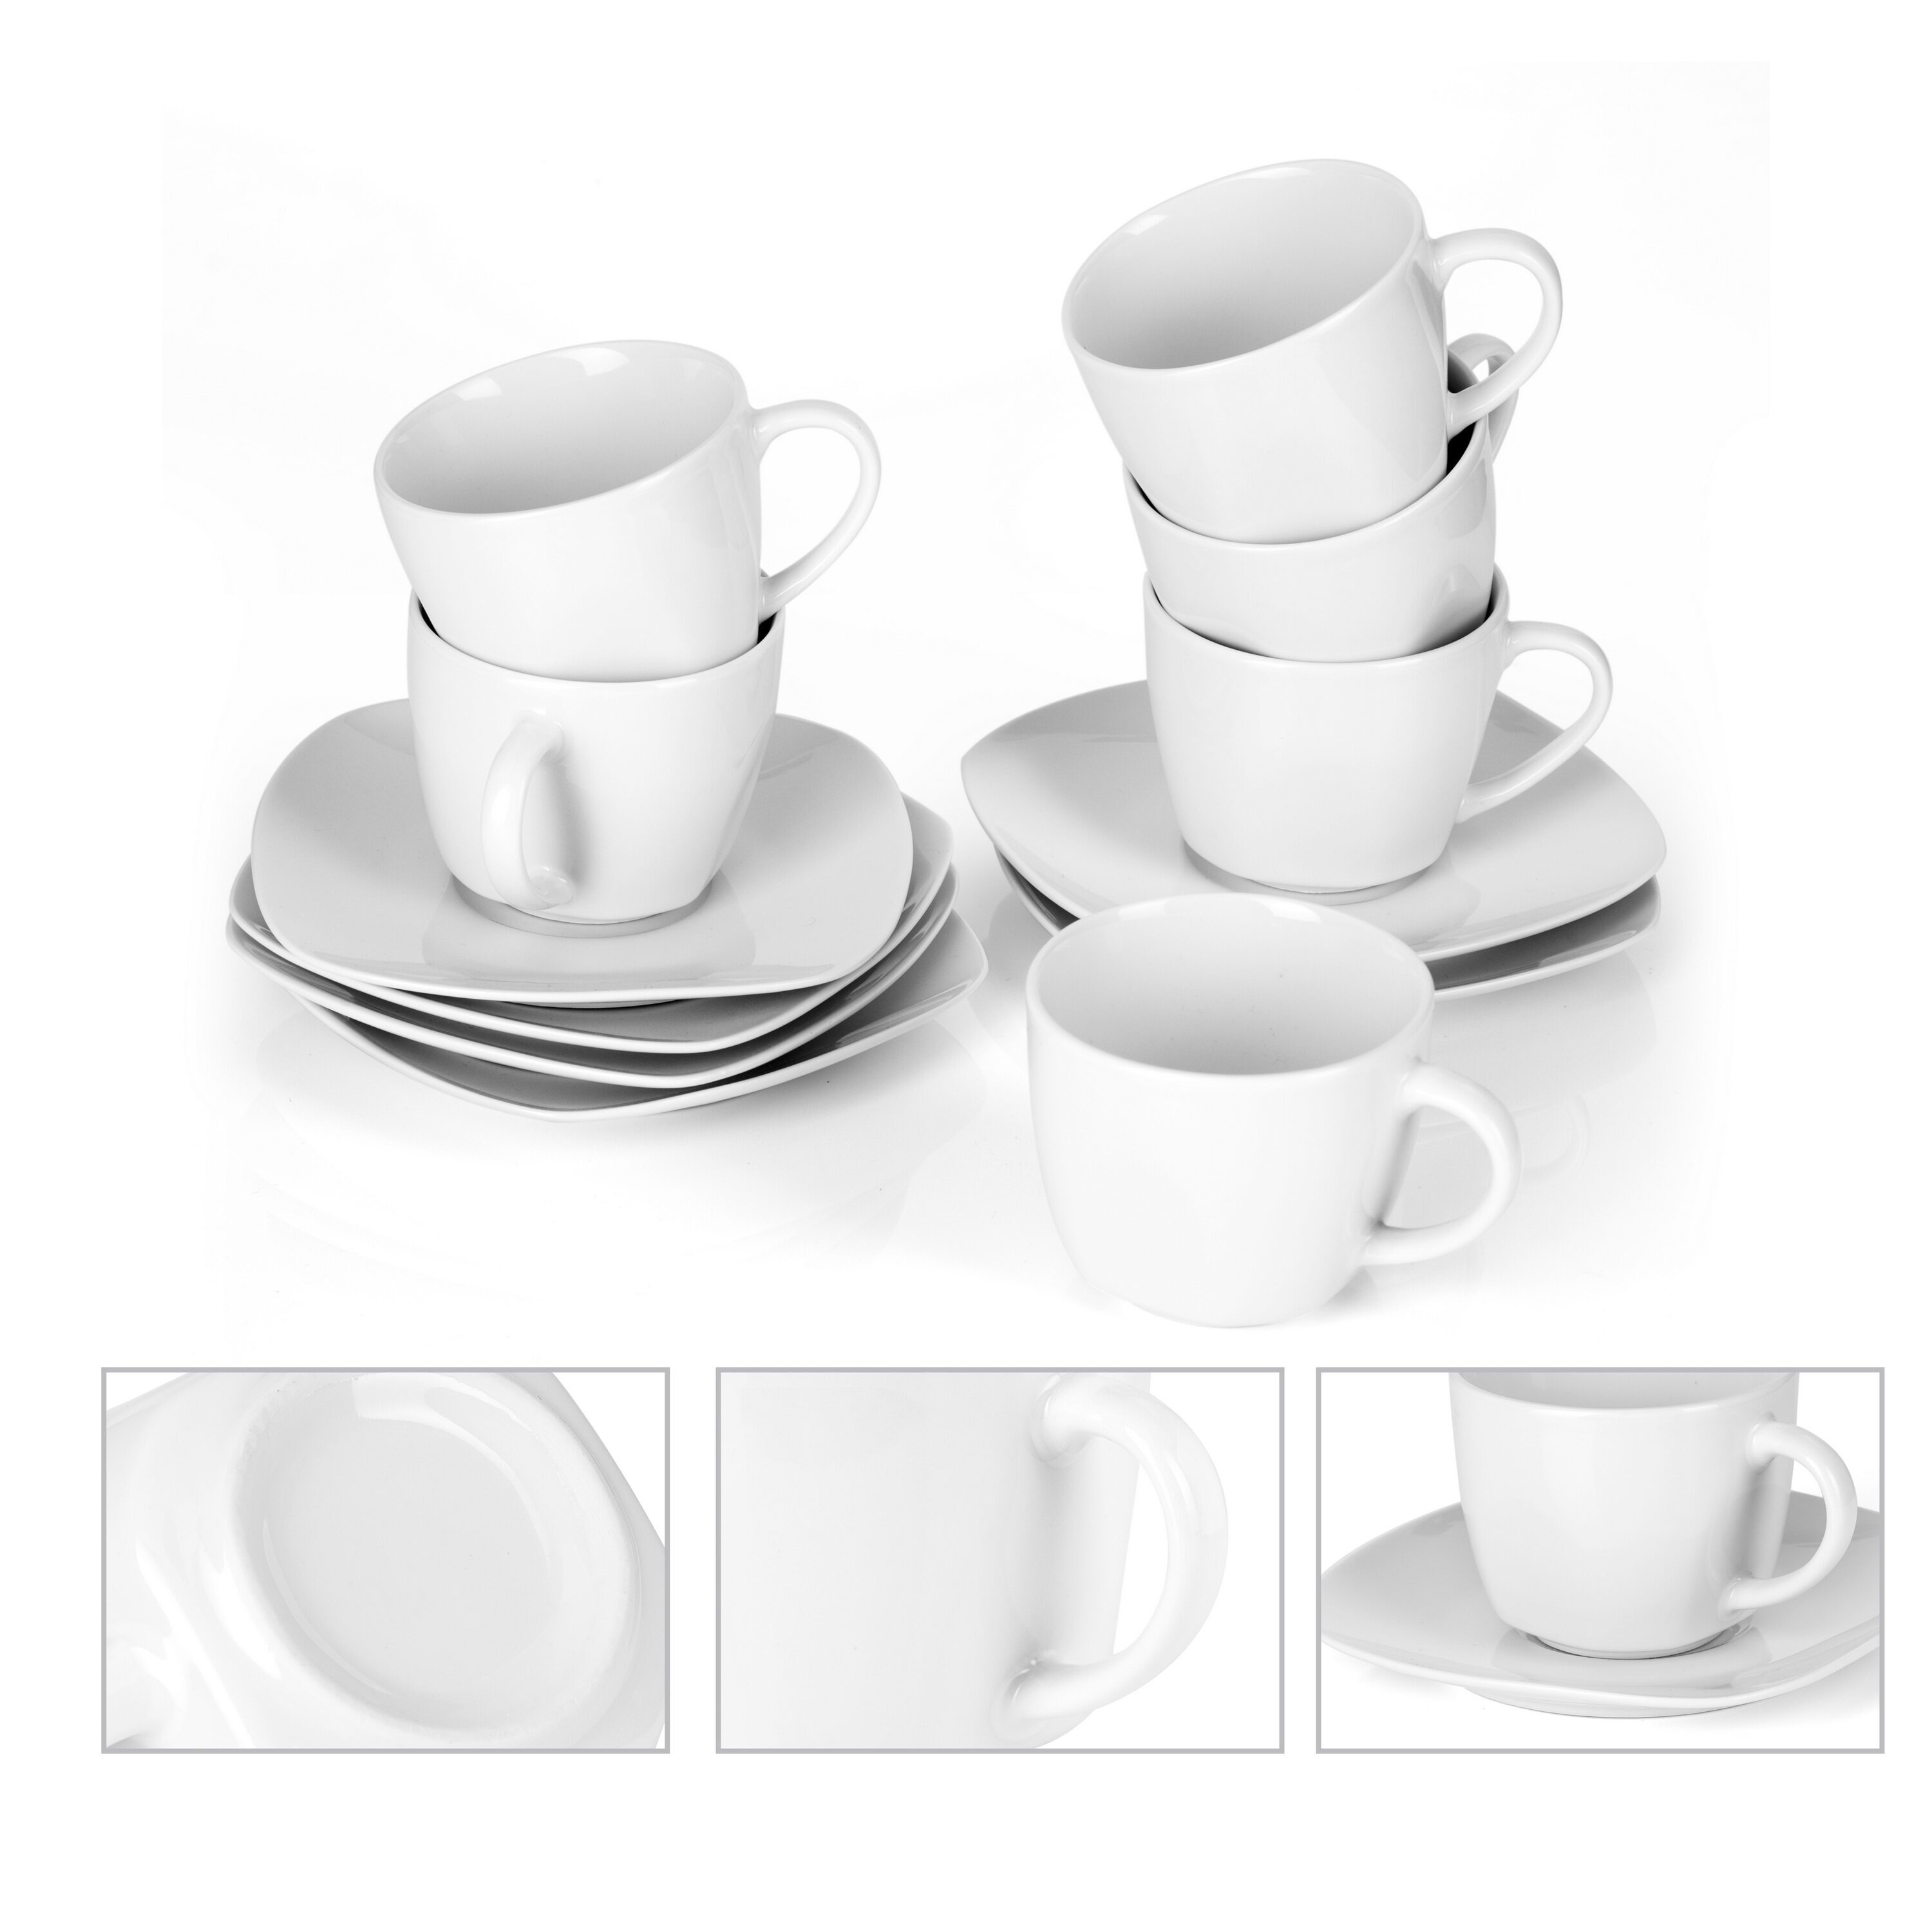 MALACASA 7-fl oz Ceramic Ivory White Cup and Saucer Set of: 6 in